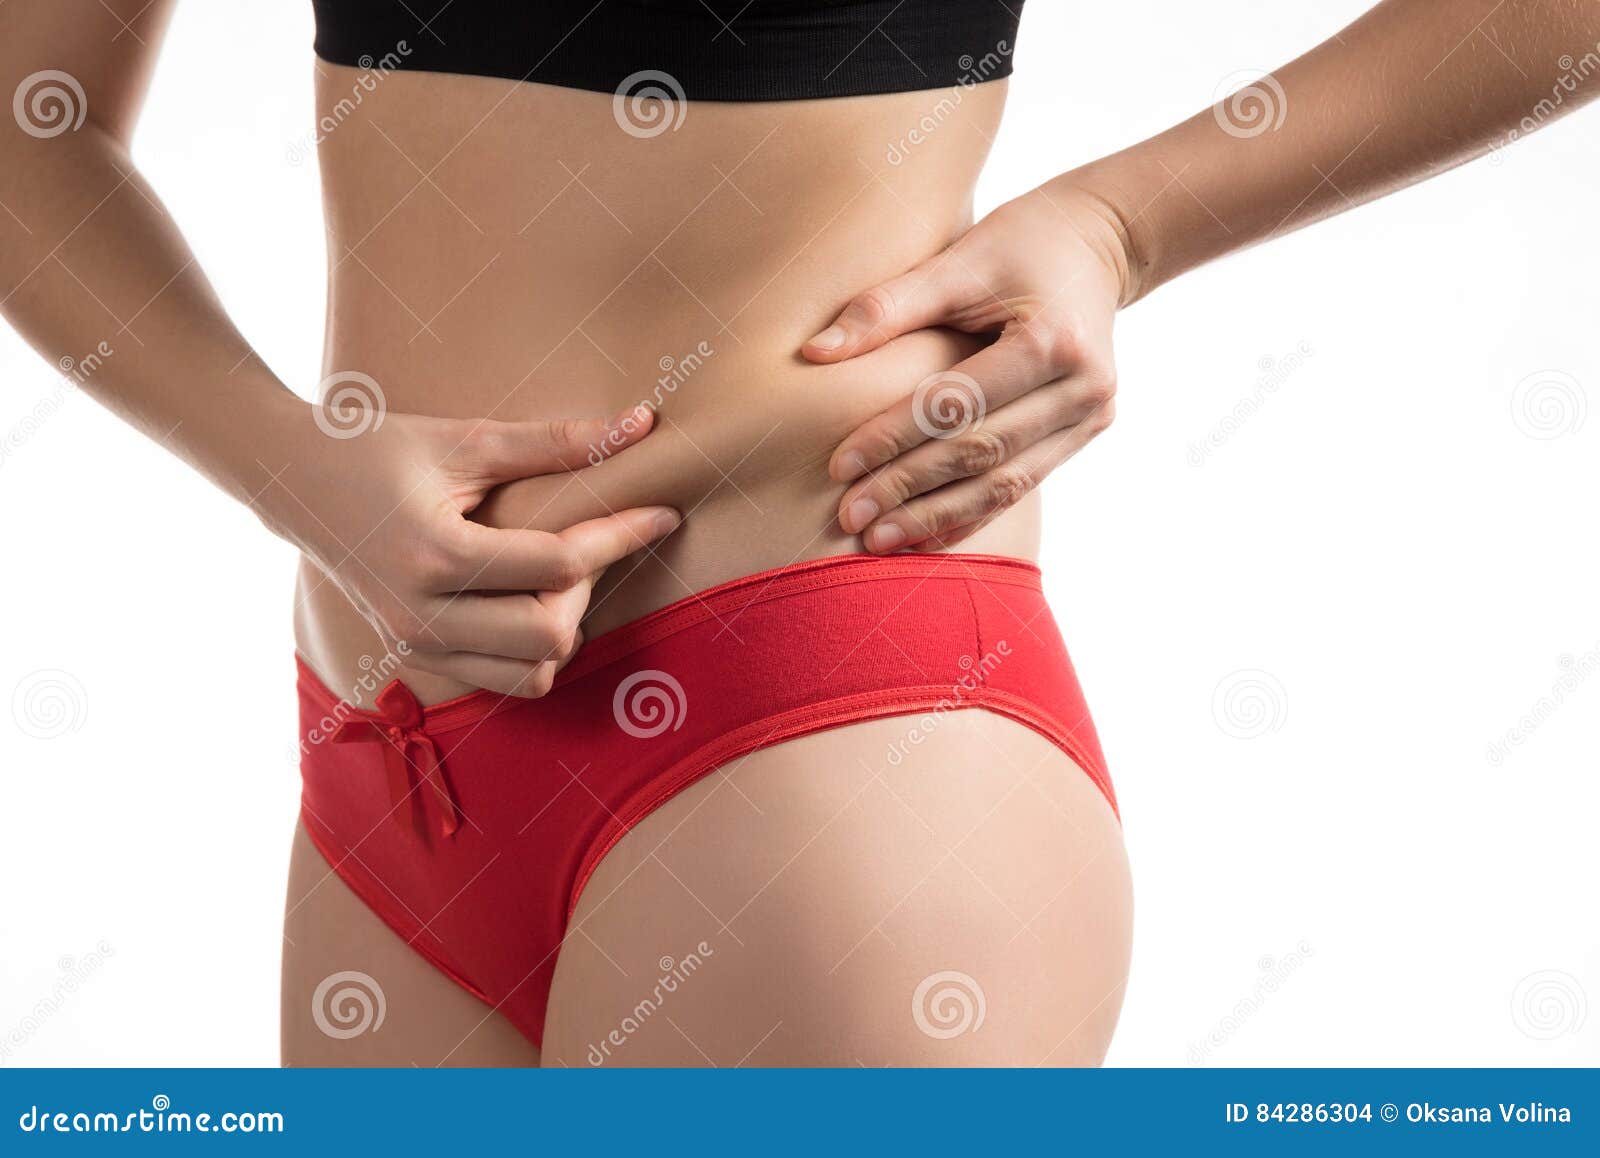 https://thumbs.dreamstime.com/z/girl-red-underwear-to-touch-fat-your-stomach-sports-waist-84286304.jpg